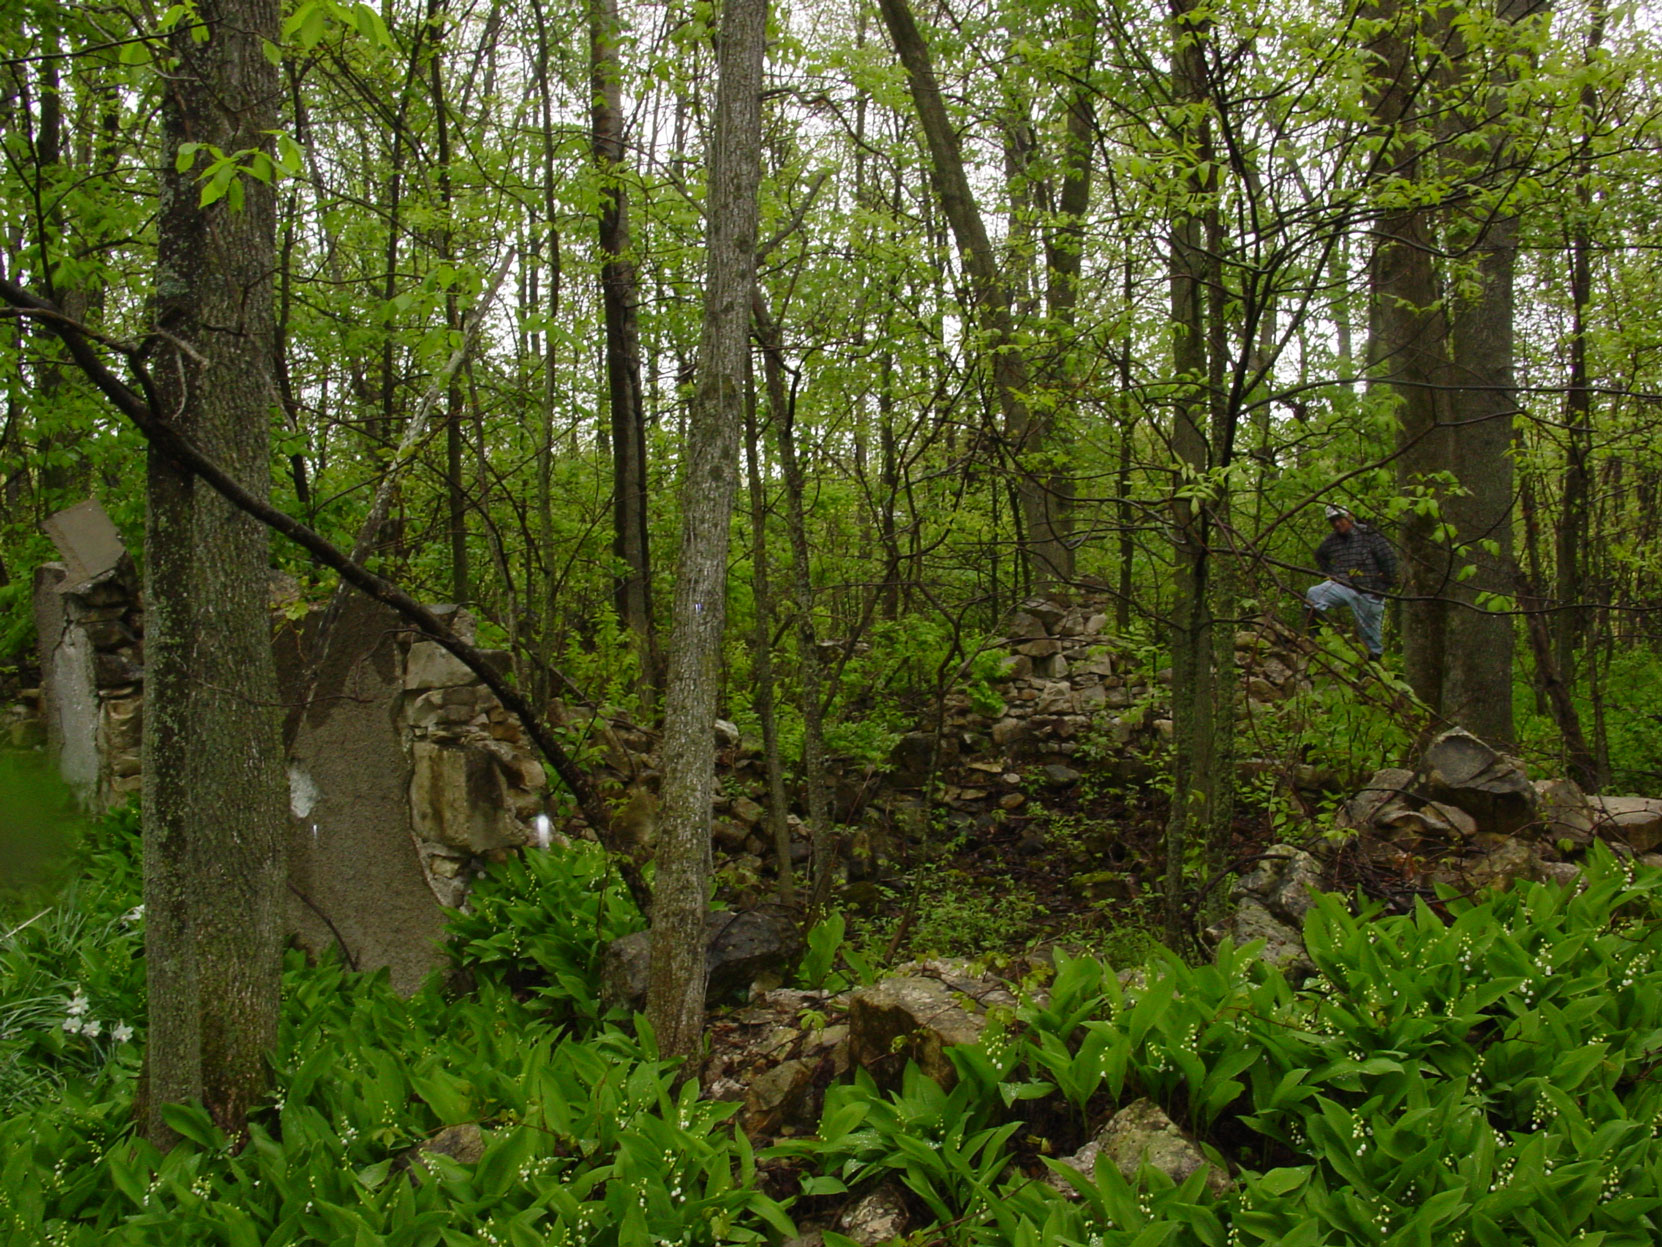 Landowner Murray Noble in what are believed to be the ruins of the Butchart's house at the Shallow Lkae factory site. Ruins of the Owen Sound Portland Cement Company factory, Shallow Lake, Ontario, 2003. (photo by author)